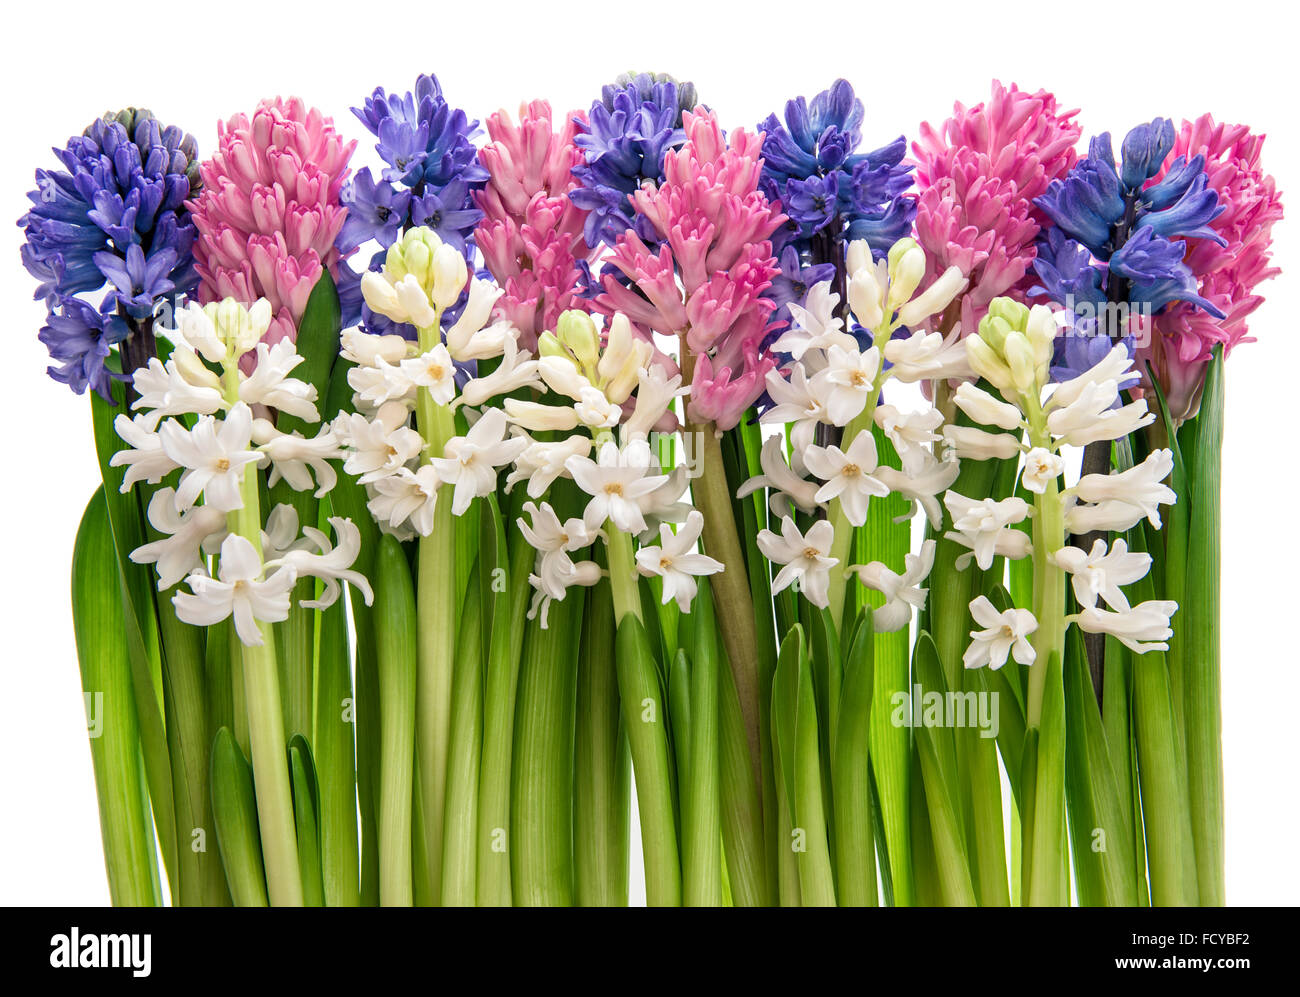 Fresh hyacinth flowers and leaves on white background. Pink, blue and white blossoms Stock Photo